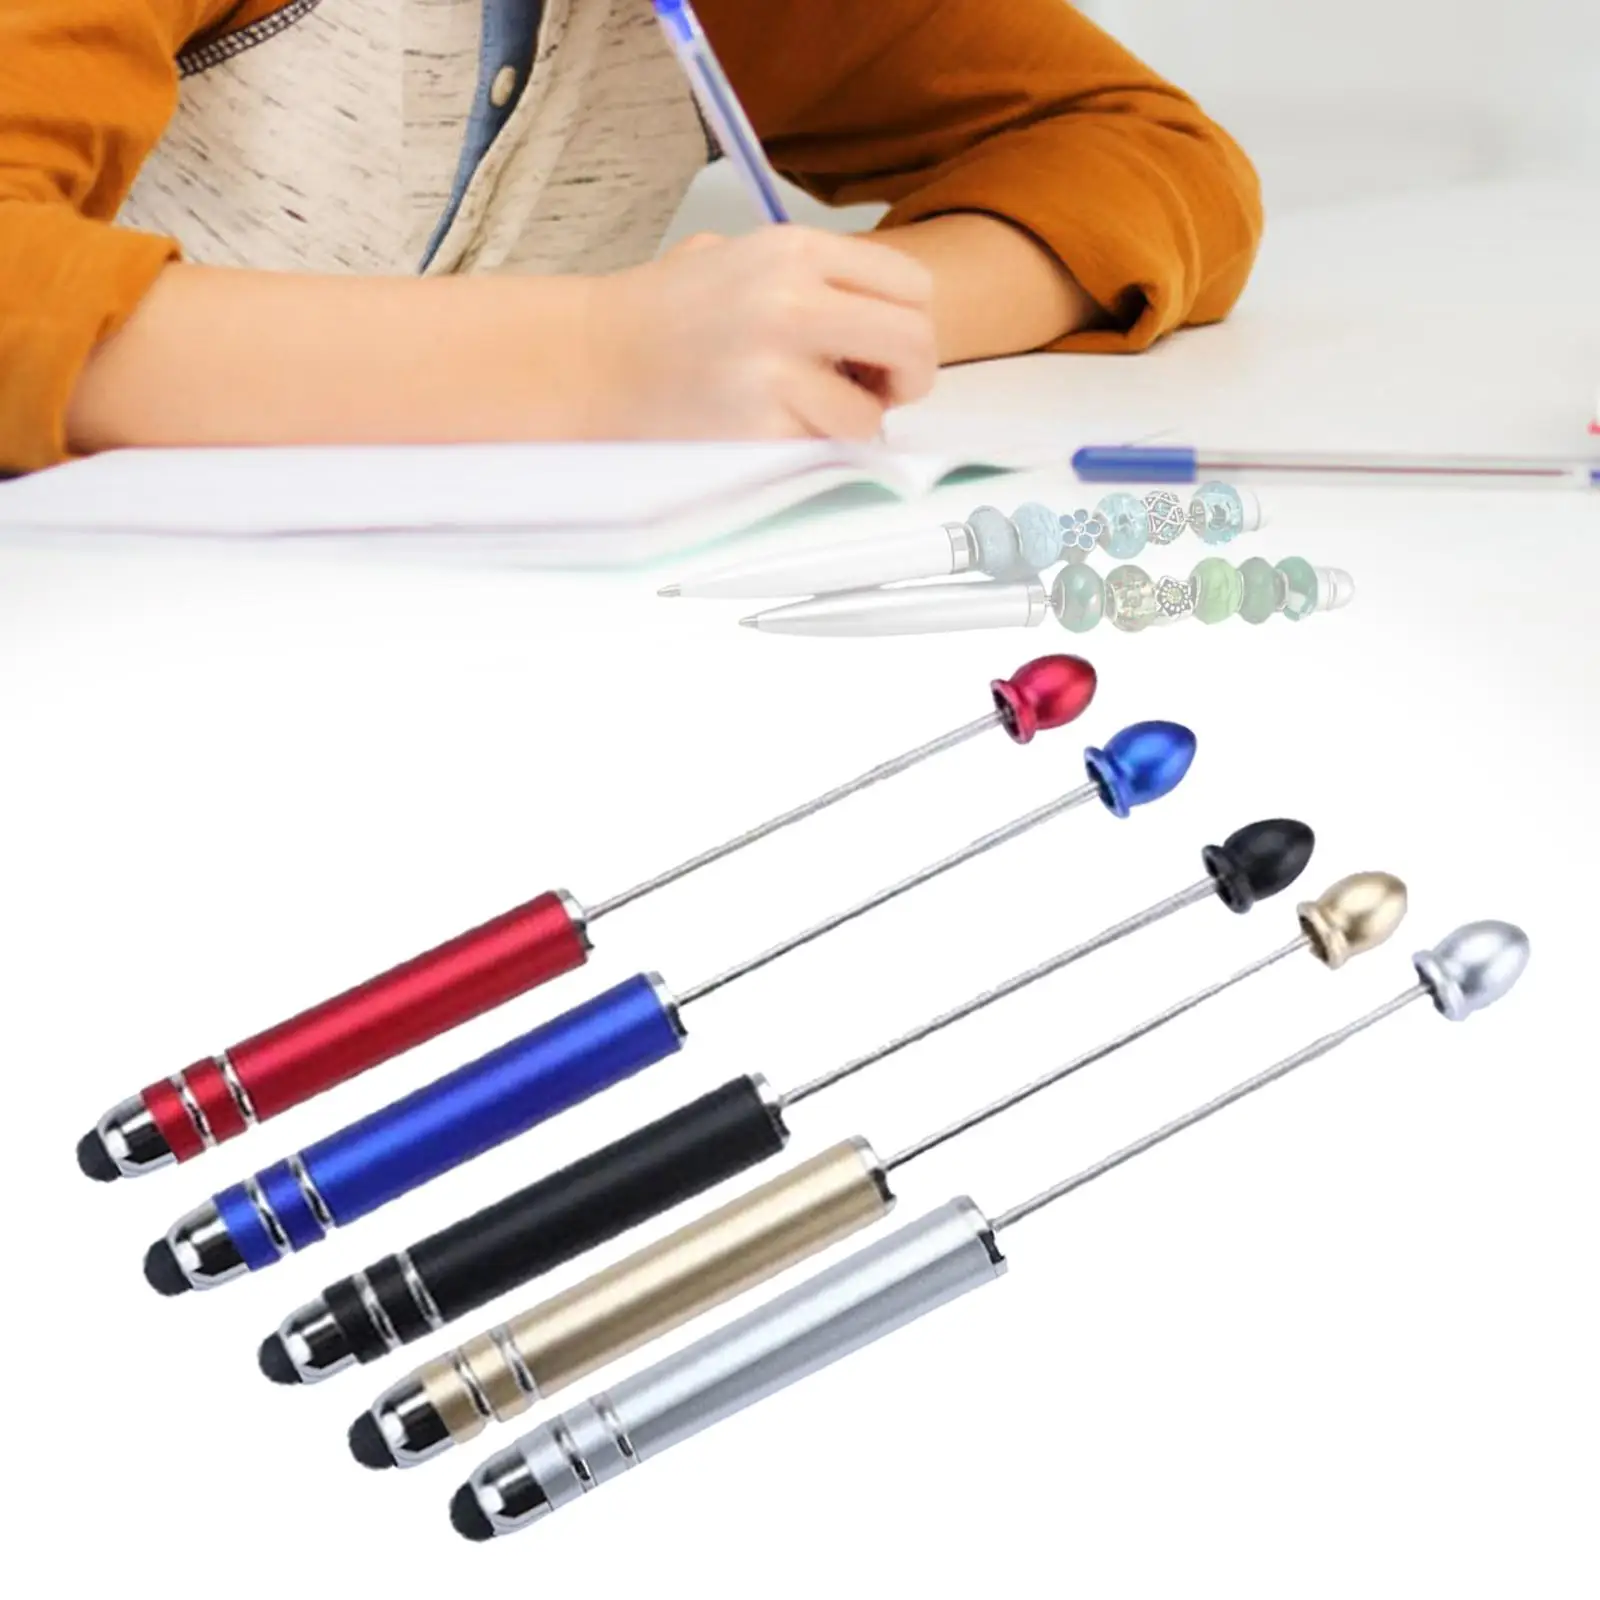 5 Pieces Beadable Pens Kits Black Ink DIY Classroom Presents Multipurpose Ballpoint Pen for Draw Exam Journaling Office Writing